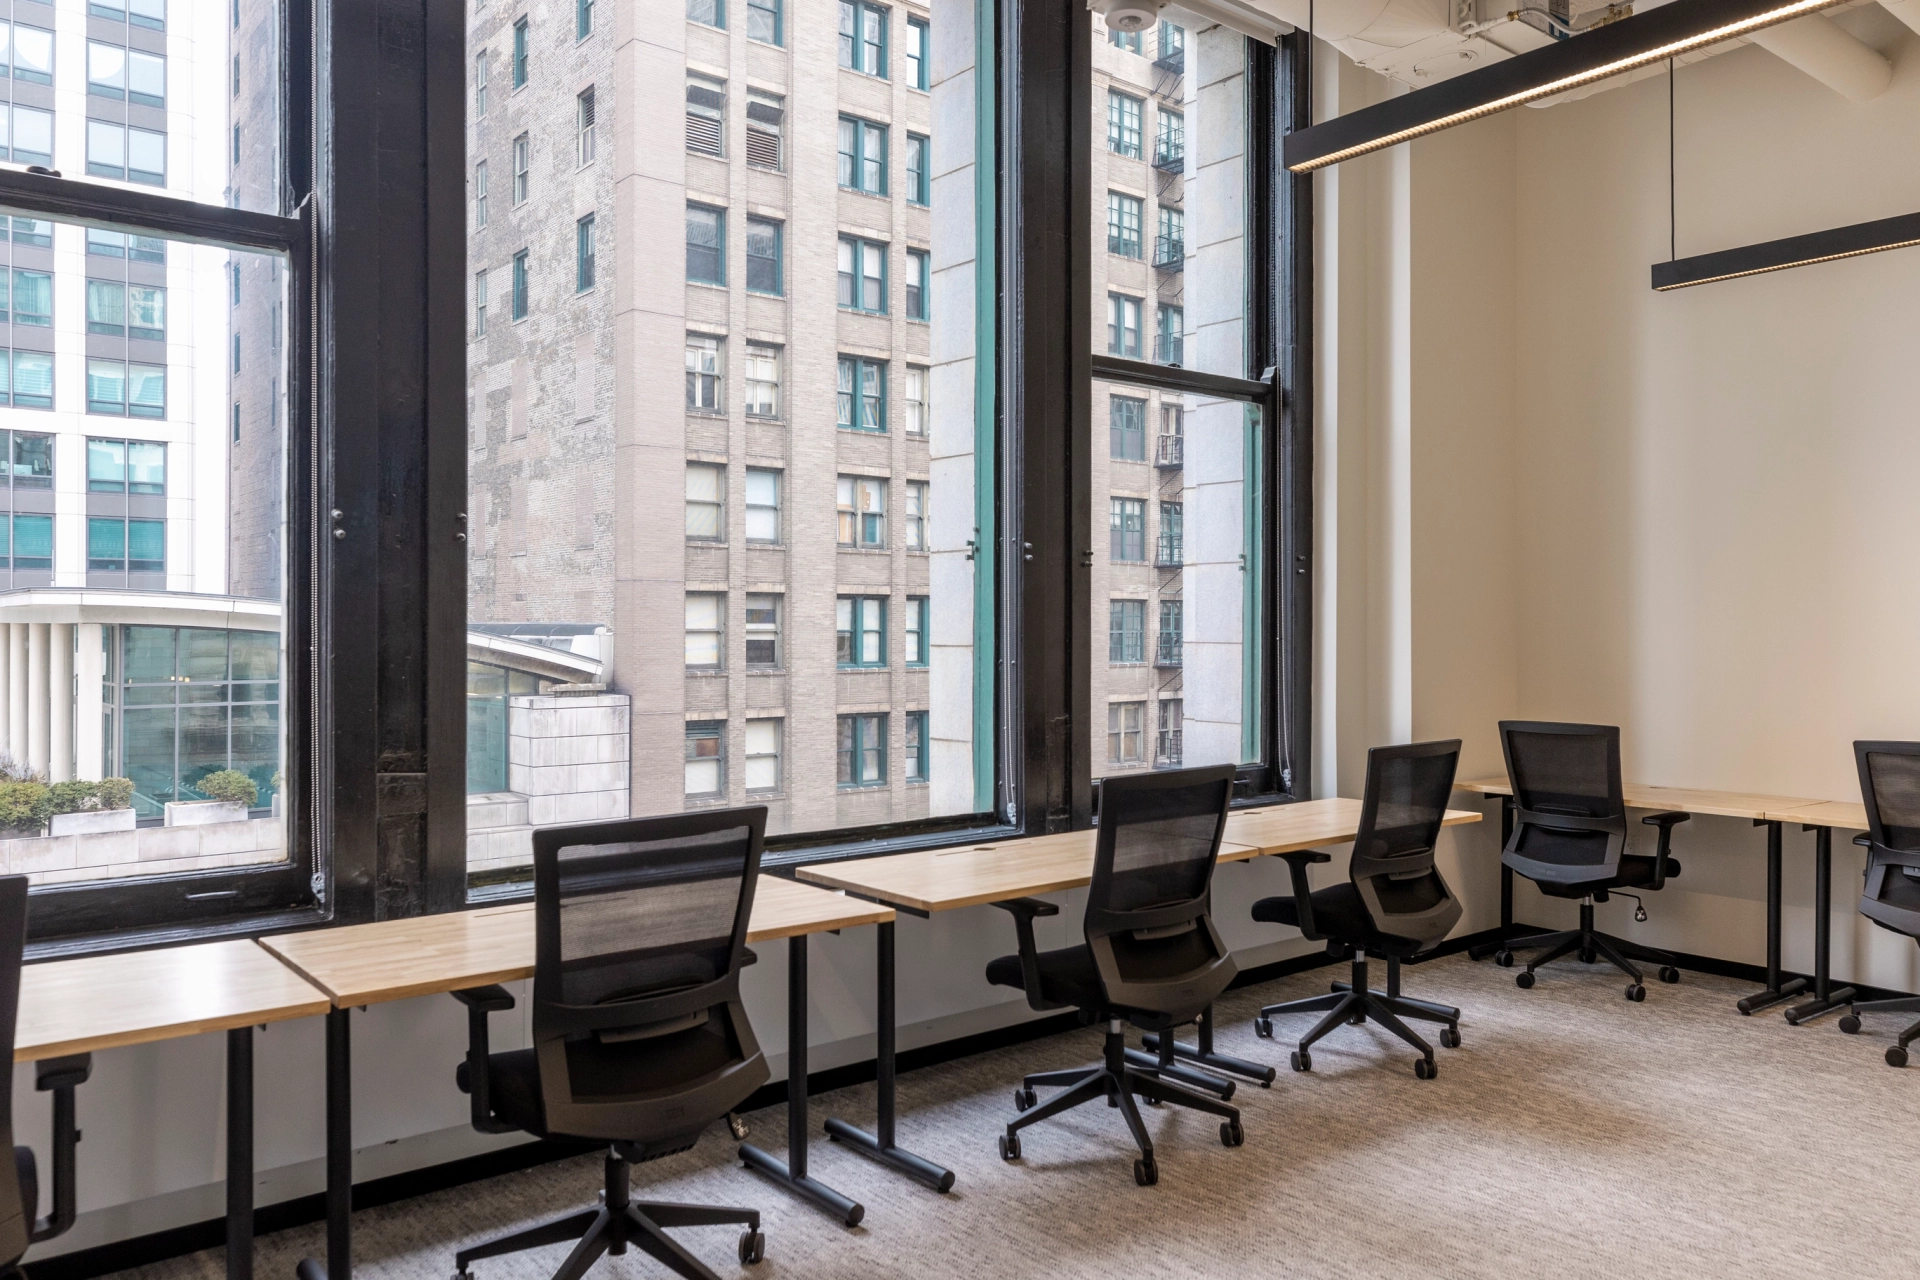 An office workspace in Chicago with desks and chairs in front of a large window.